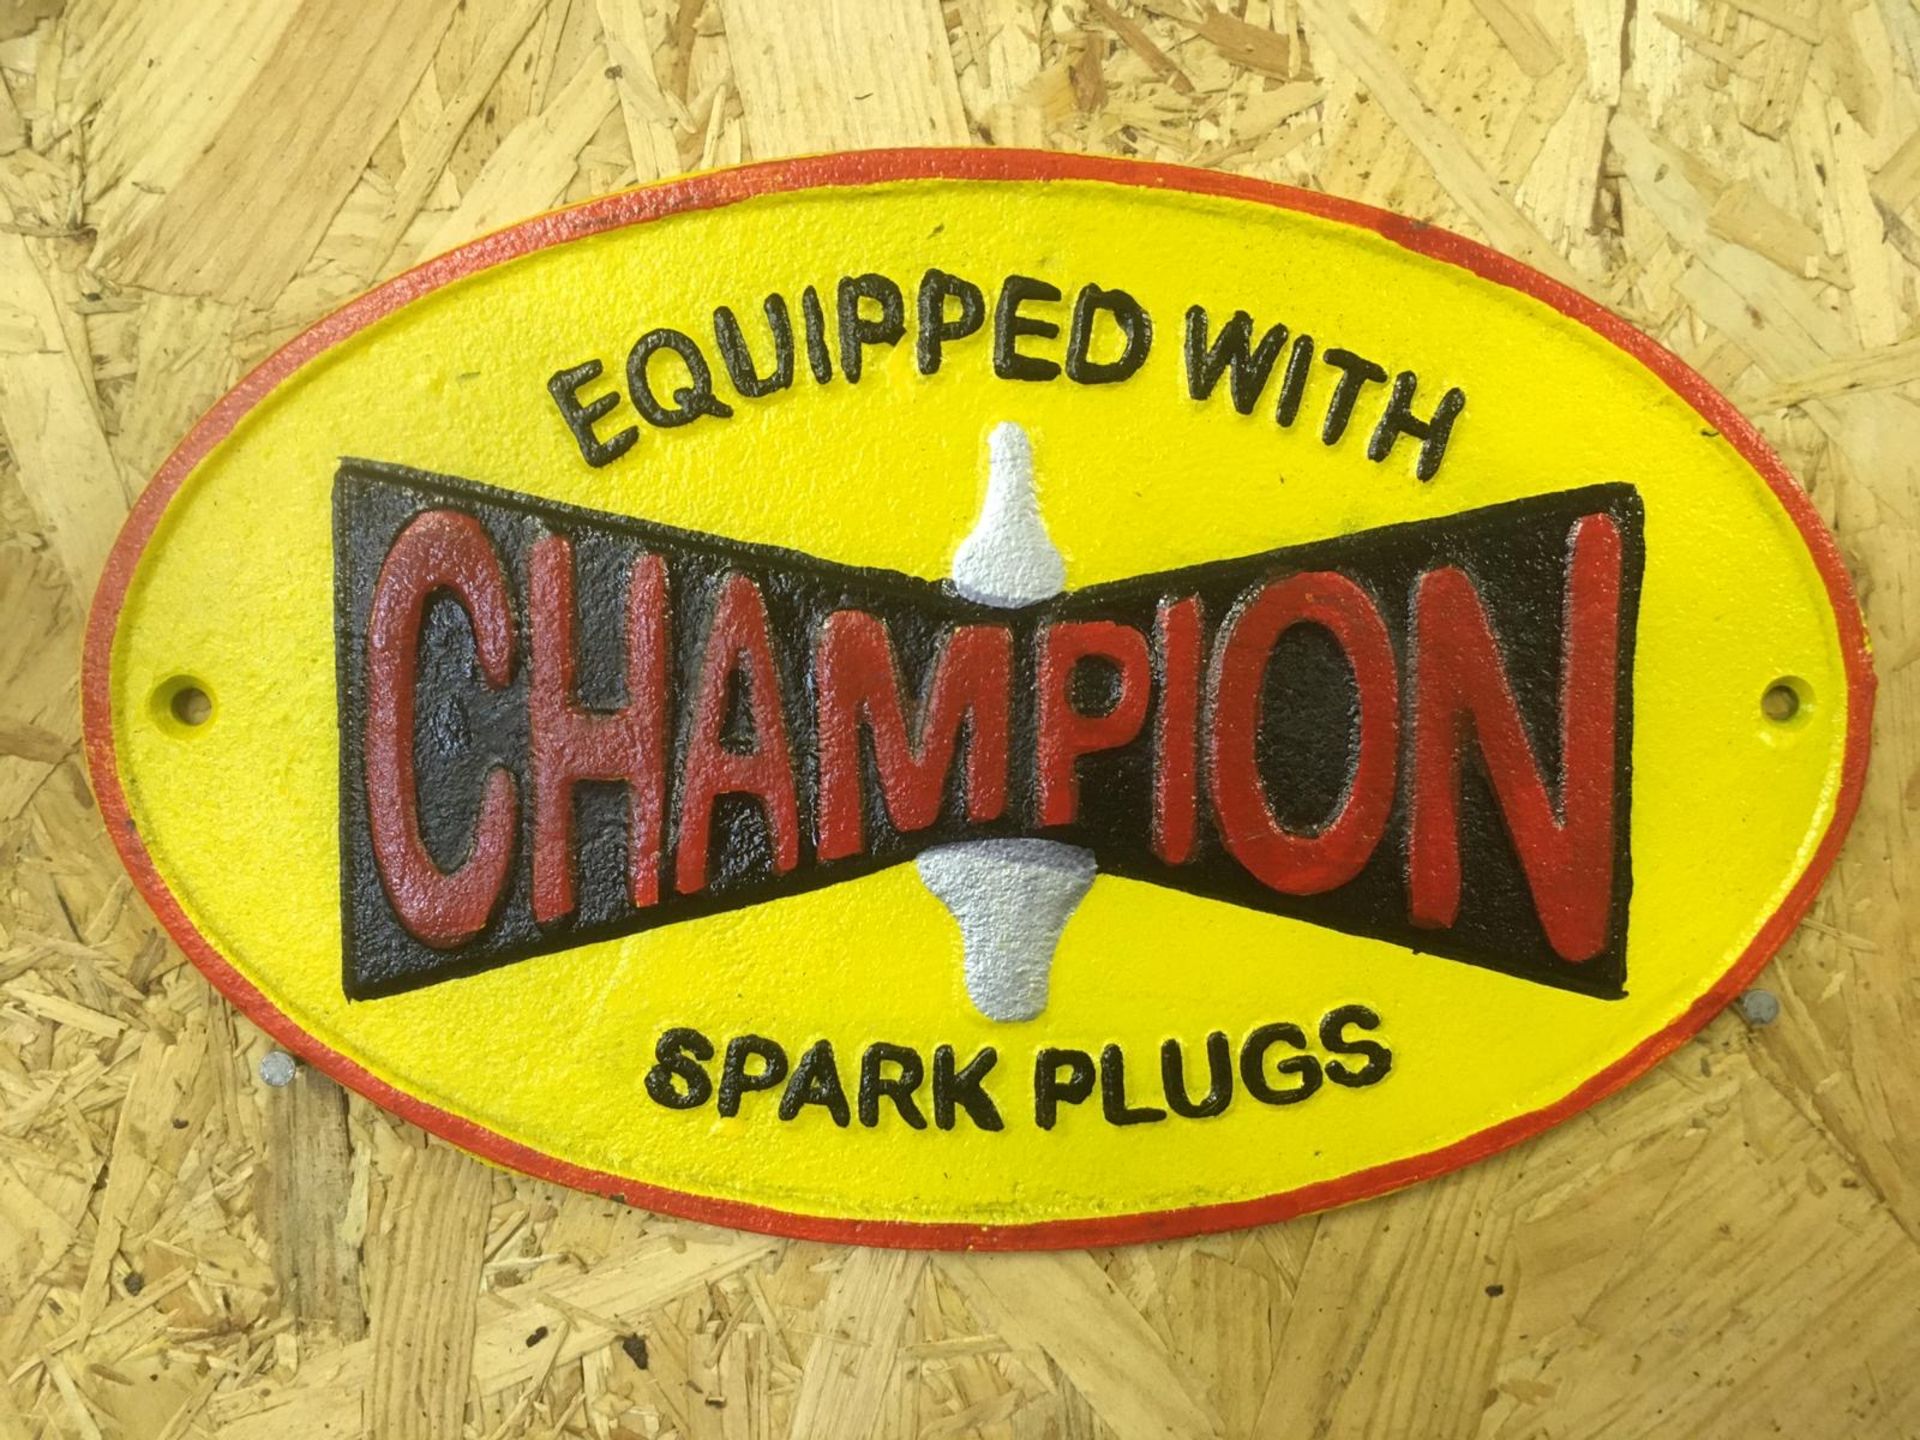 Champion 'Spark Plugs' Wall Plaque